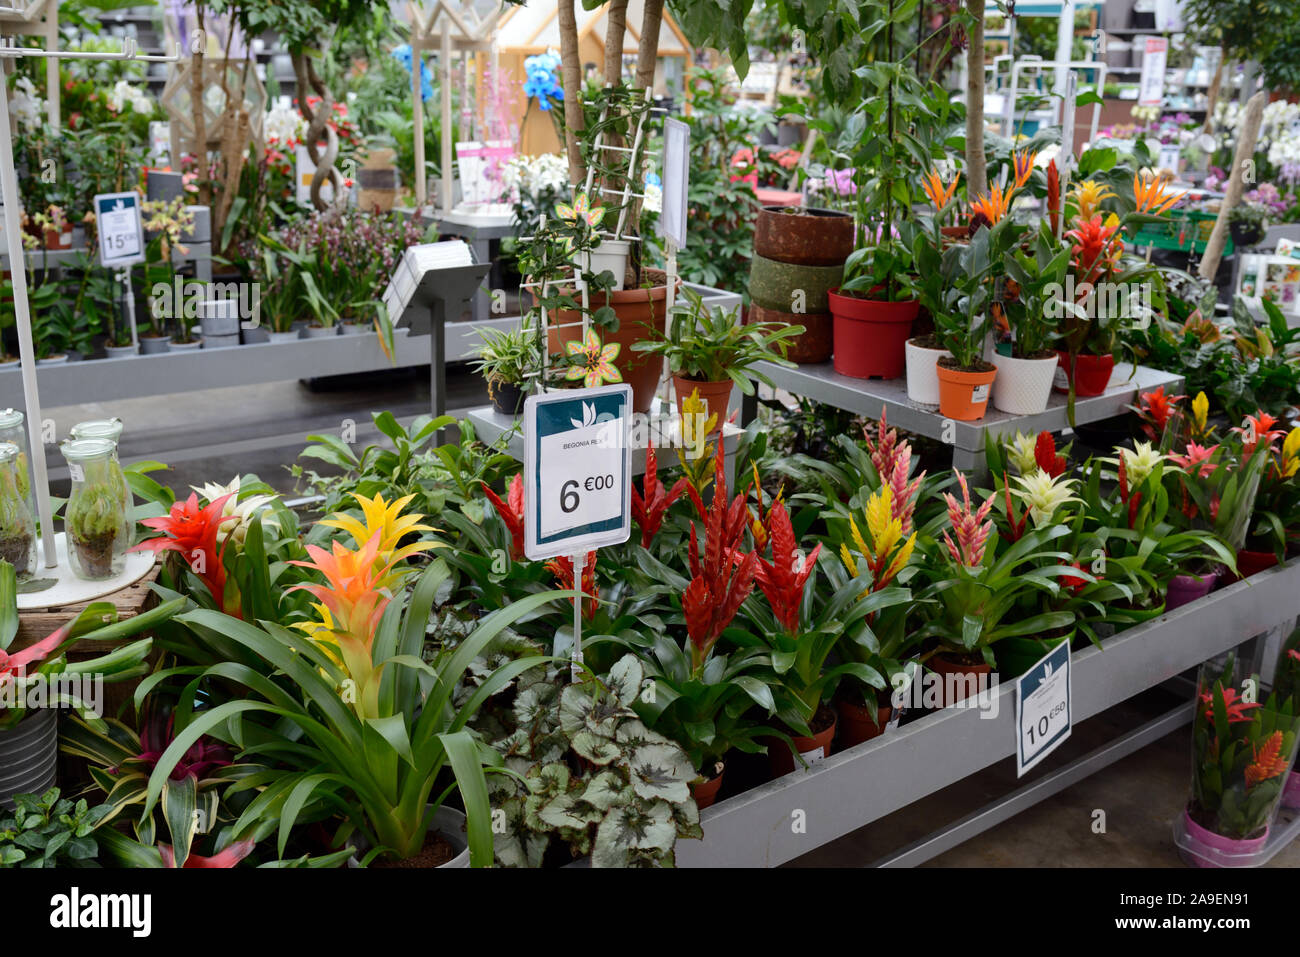 Plant Display or Collection including Bromelia Hybrids For Sale in Garden Centre or Florist Shop Stock Photo